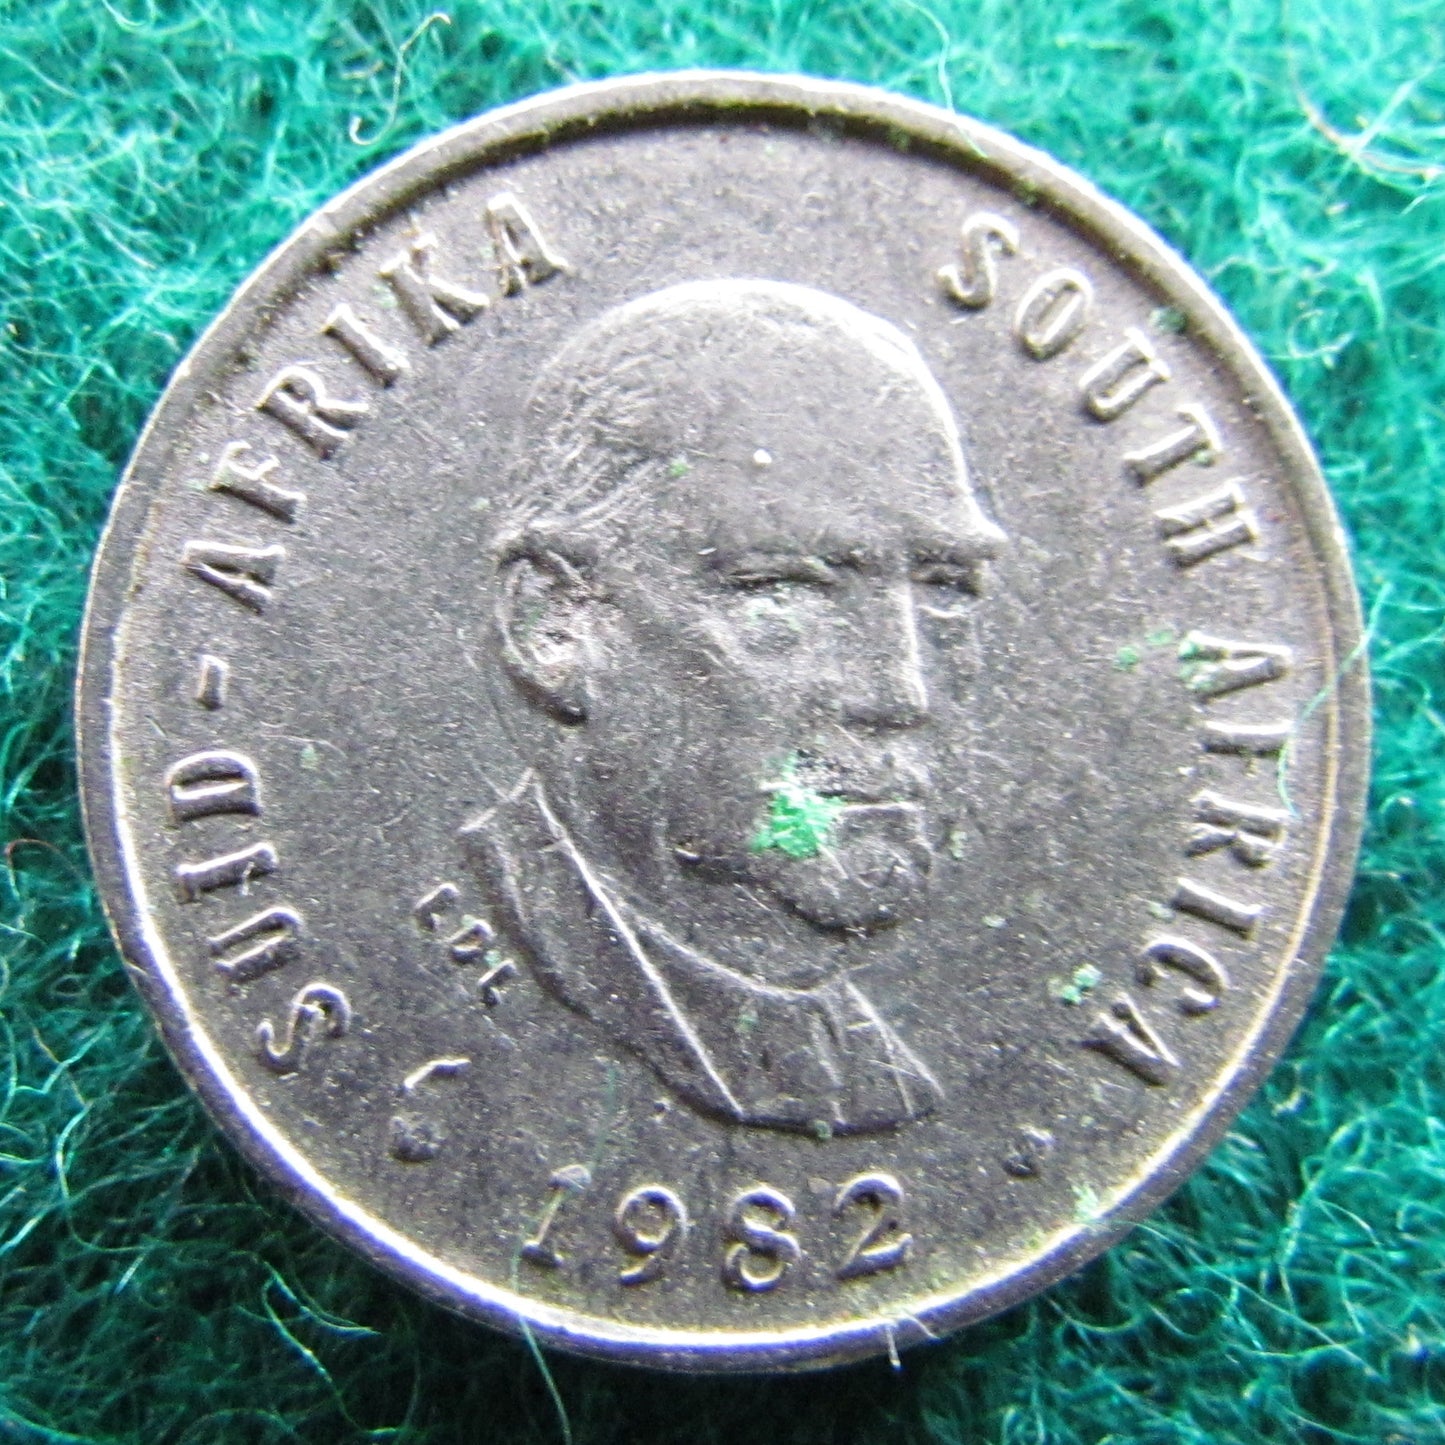 South Africa 1982 5 Cent Coin